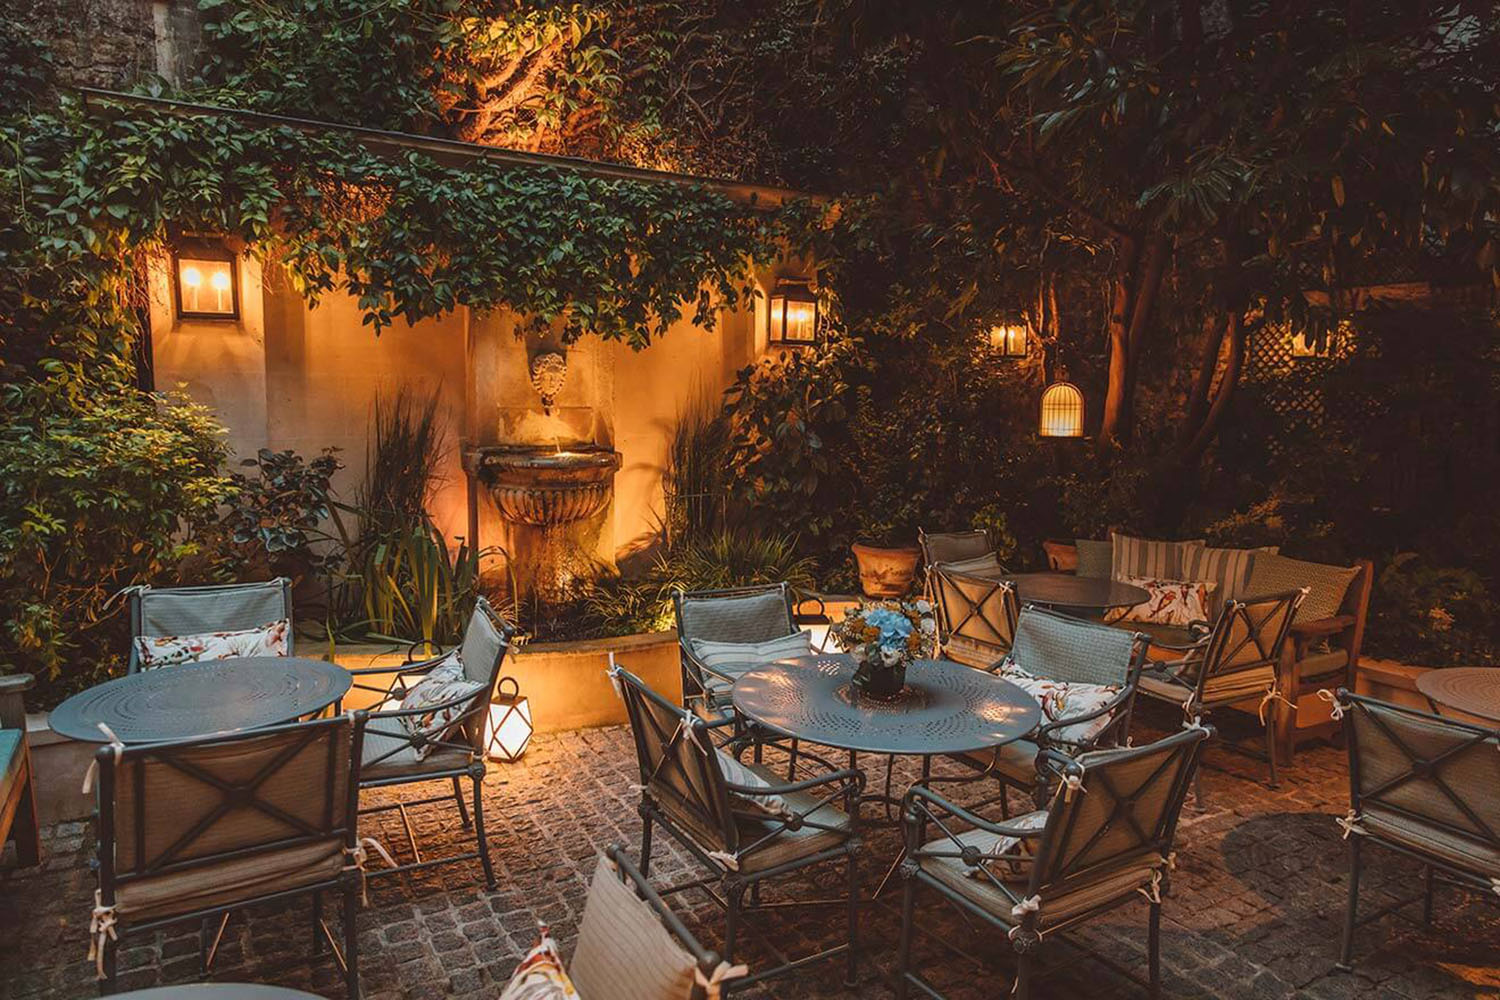 The courtyard garden restaurant of Hôtel de l'Abbaye at night, with warm lanterns to set the mood